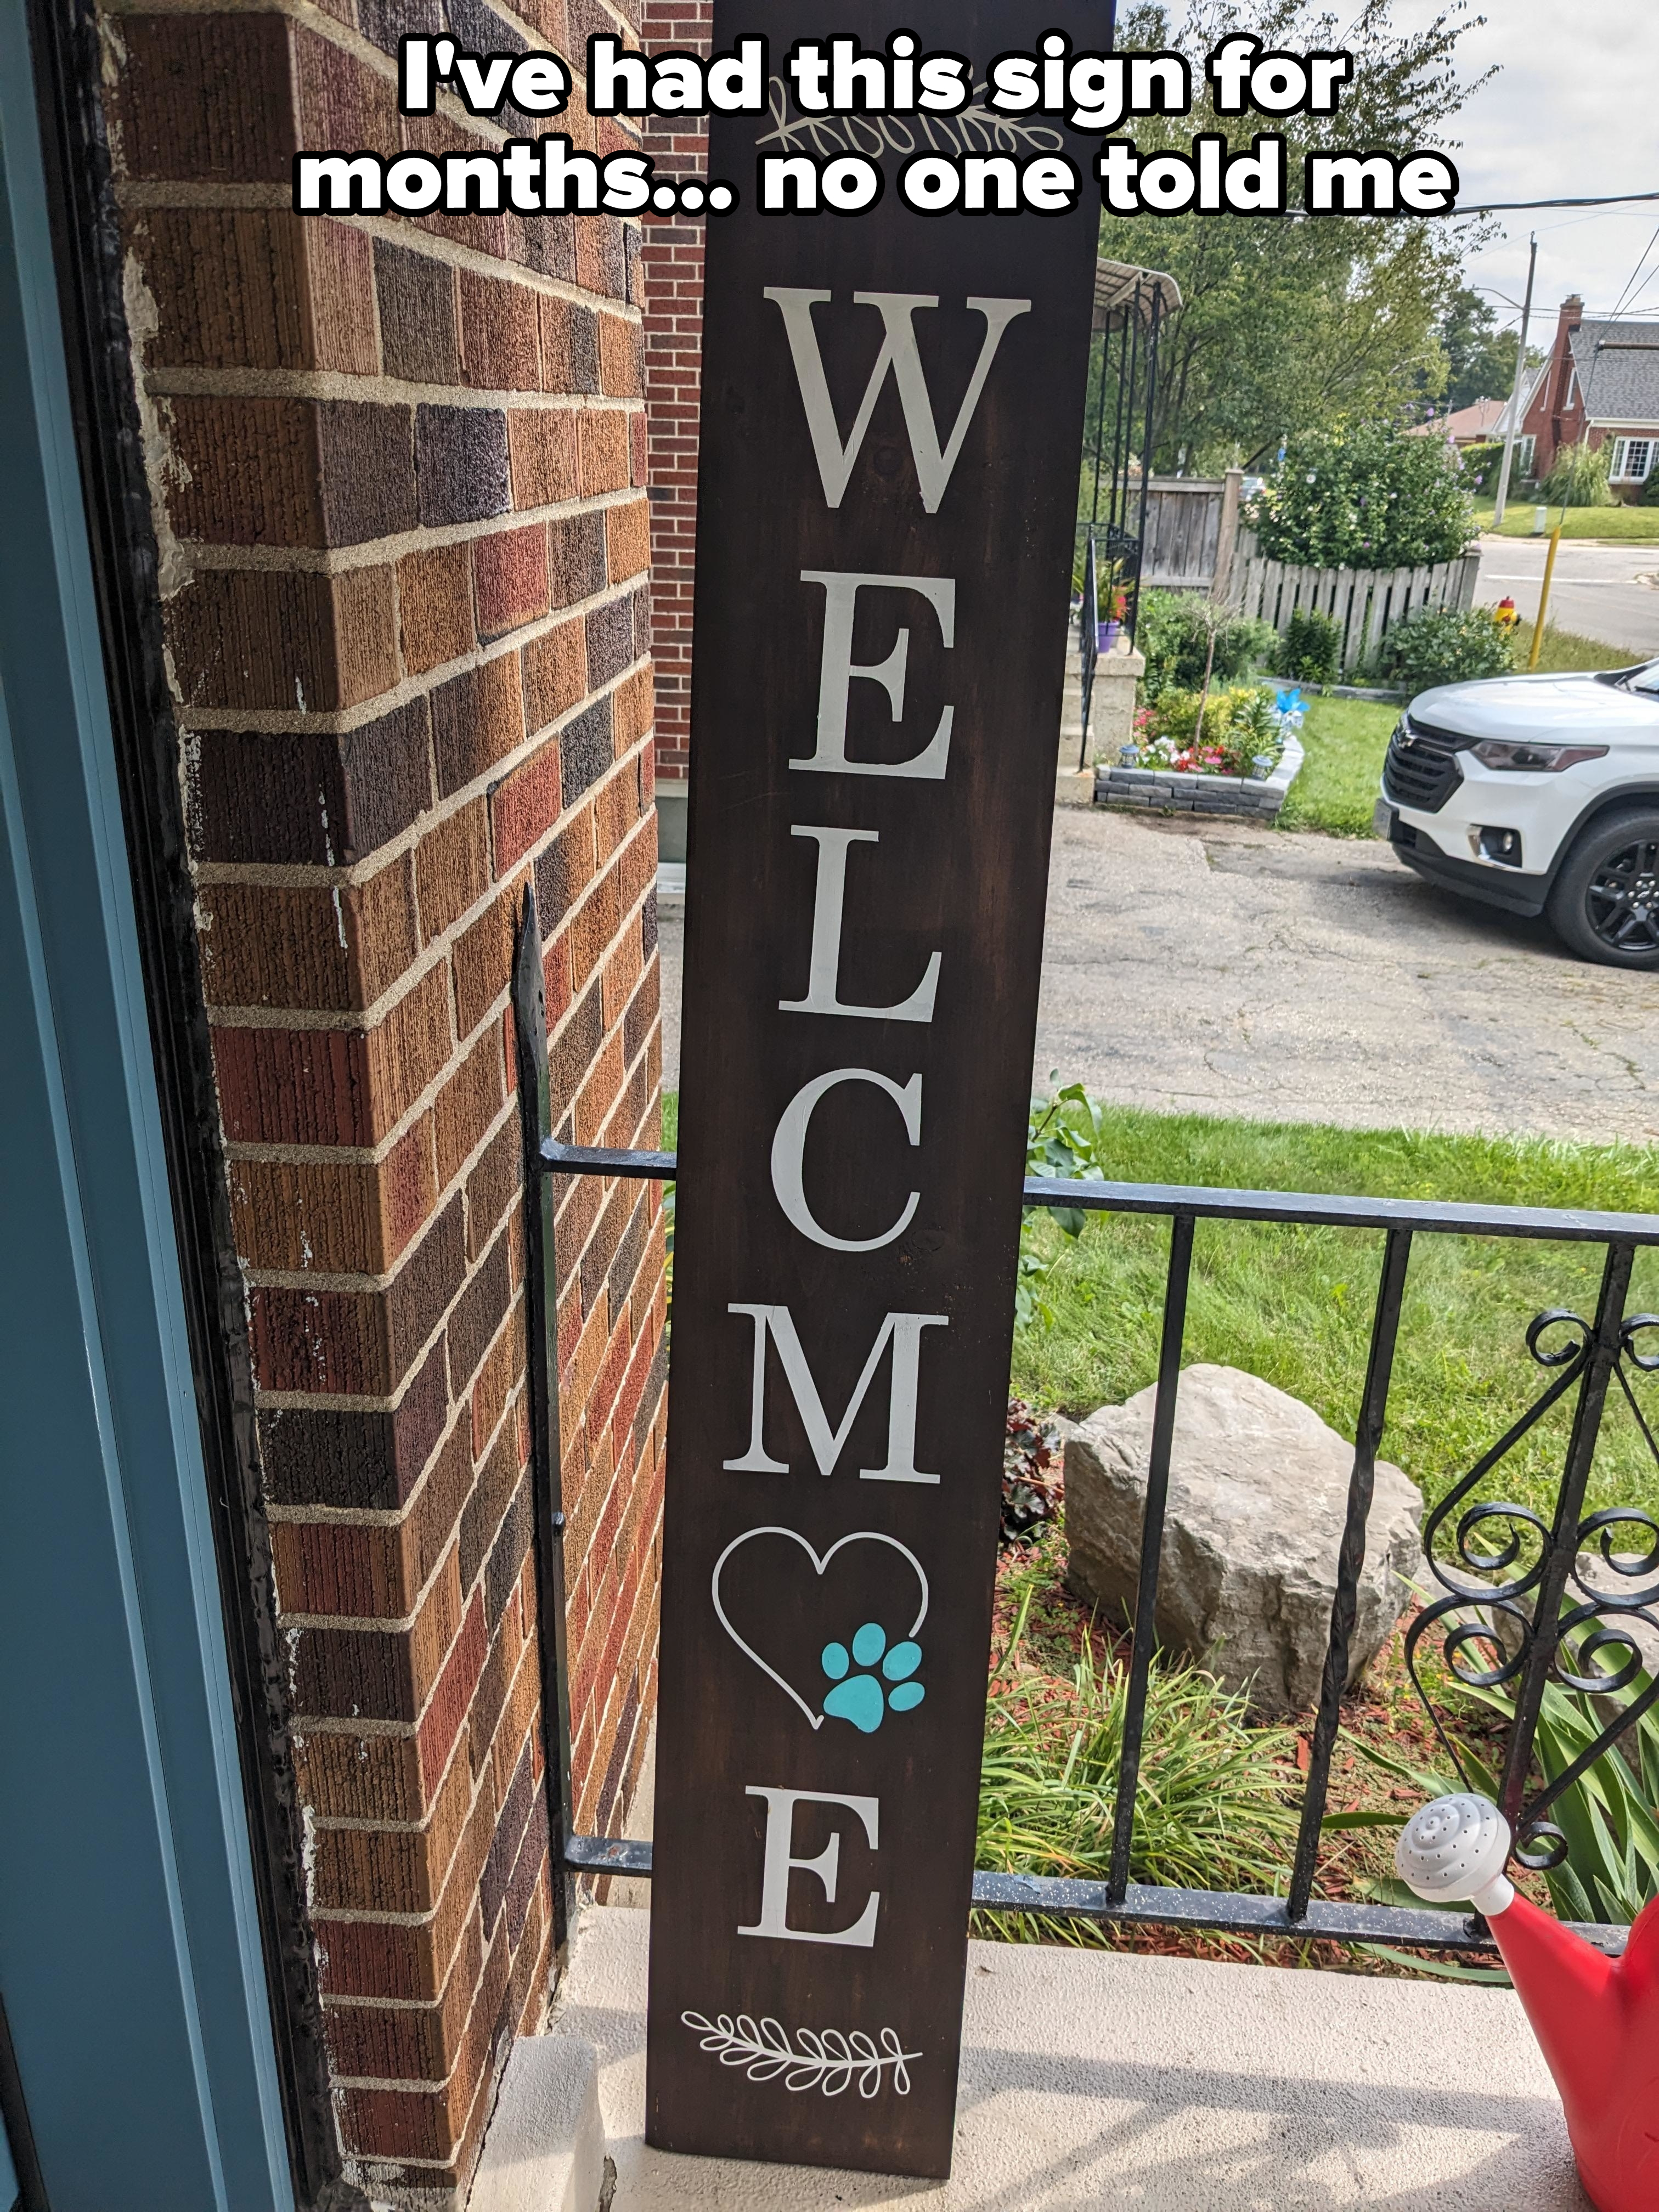 A welcome sign